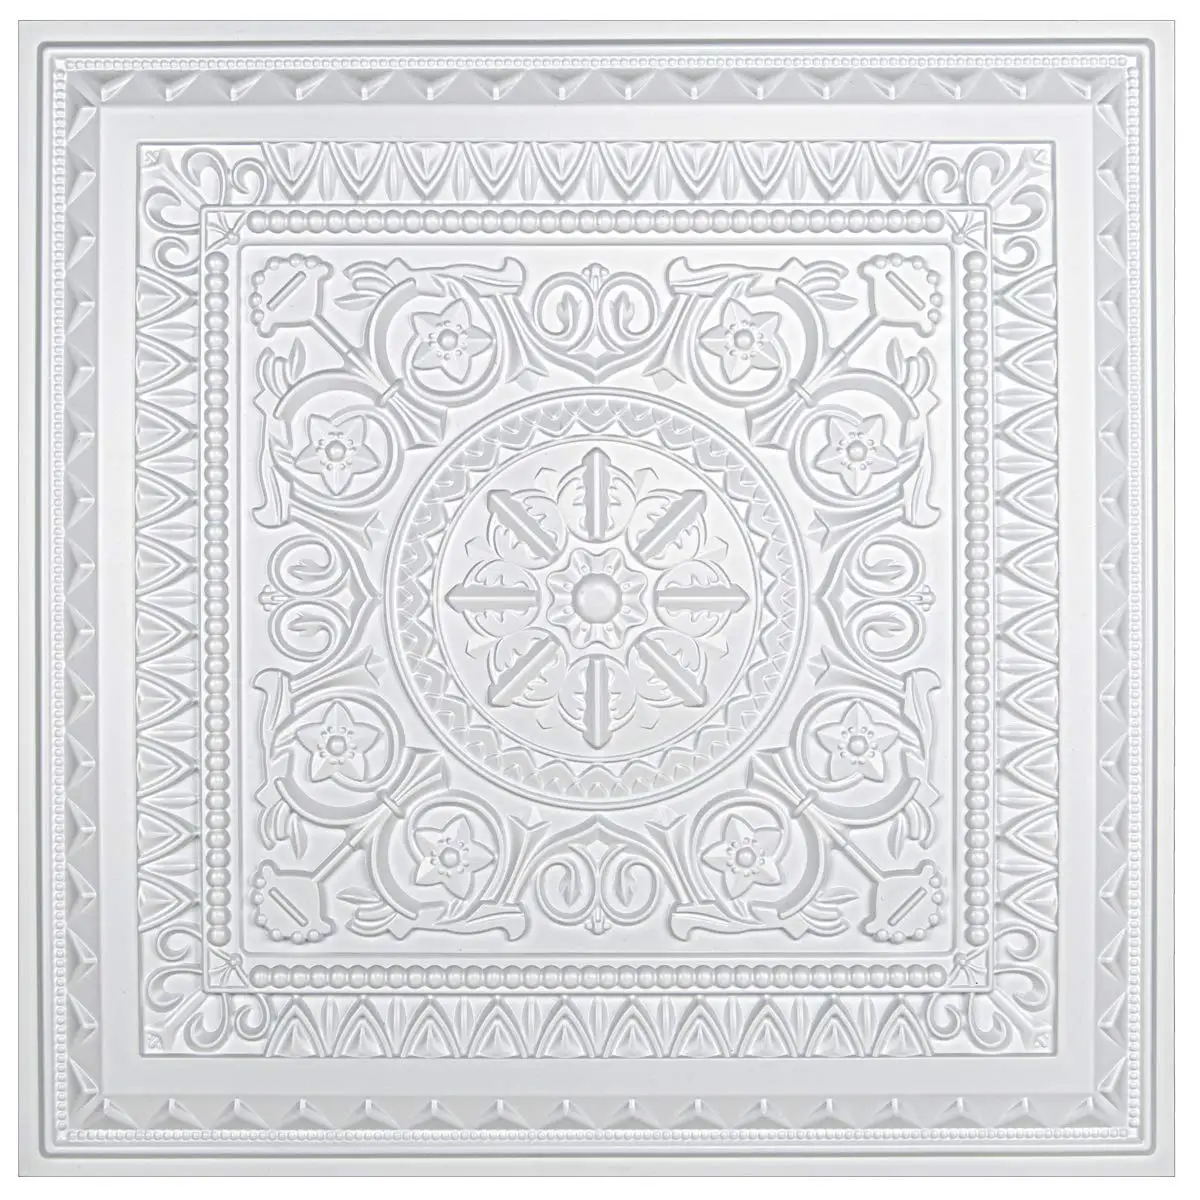 12PCS PVC 3D Ceiling Tiles Wall Panels Decorative Water Proof Moisture-proof  Plastic Sheet in White (60x60cm) chahua sealed rice bucket the ultimate moisture proof solution for household plastic storageintroducing the chahua sealed rice